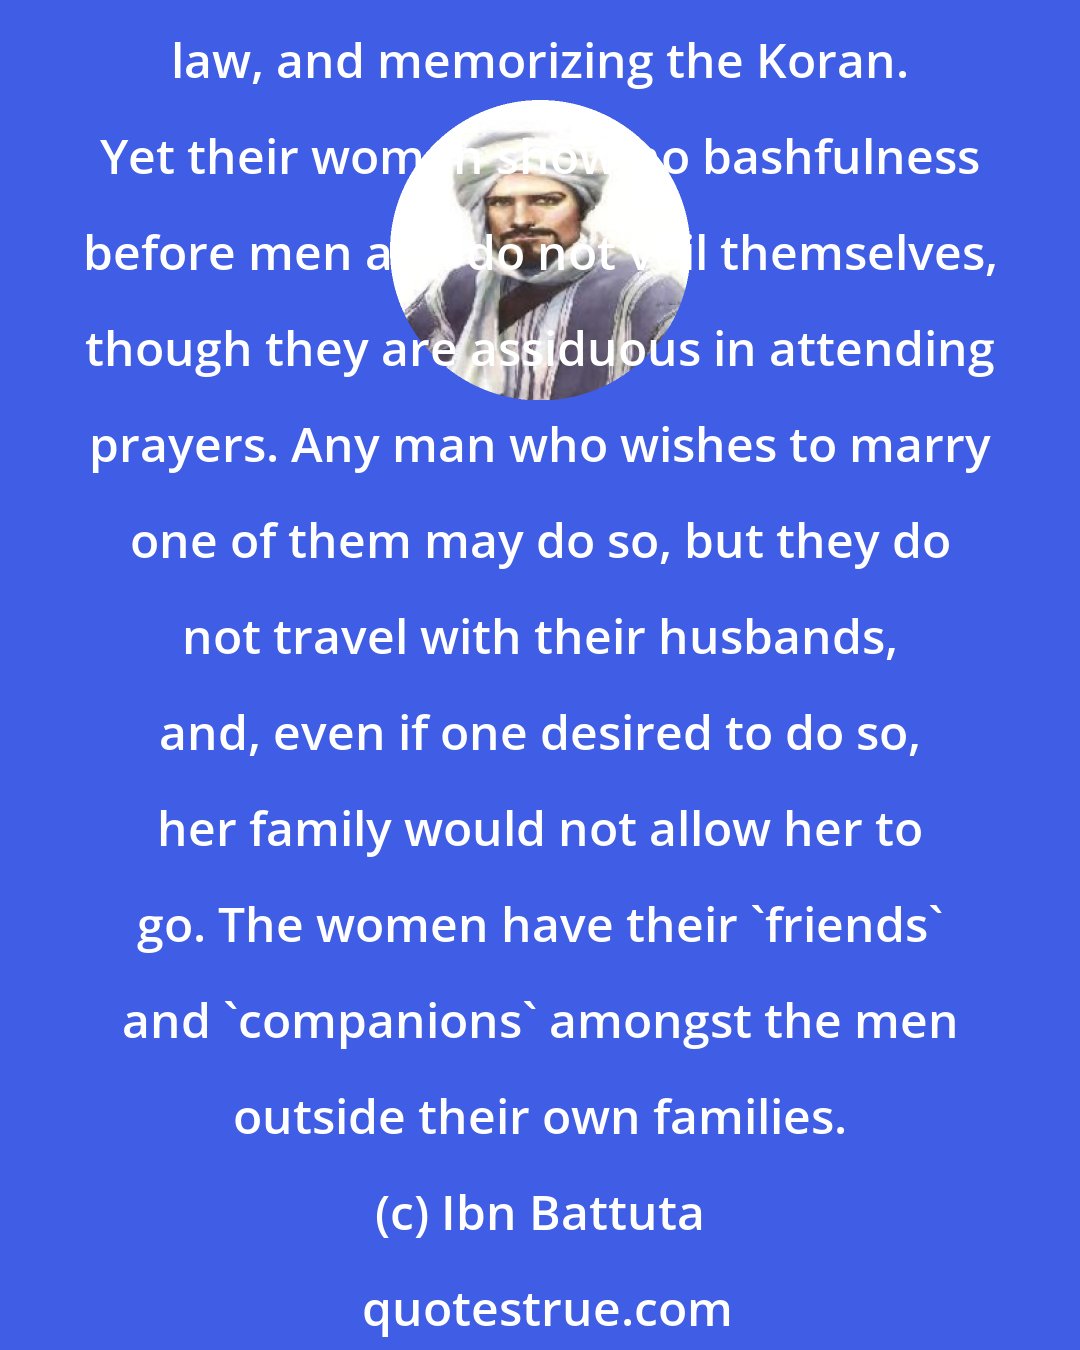 Ibn Battuta: Their women are of surpassing beauty, and are shown more respect than the men. These people are Muslims, punctilious in observing the hours of prayer, studying the books of law, and memorizing the Koran. Yet their women show no bashfulness before men and do not veil themselves, though they are assiduous in attending prayers. Any man who wishes to marry one of them may do so, but they do not travel with their husbands, and, even if one desired to do so, her family would not allow her to go. The women have their 'friends' and 'companions' amongst the men outside their own families.